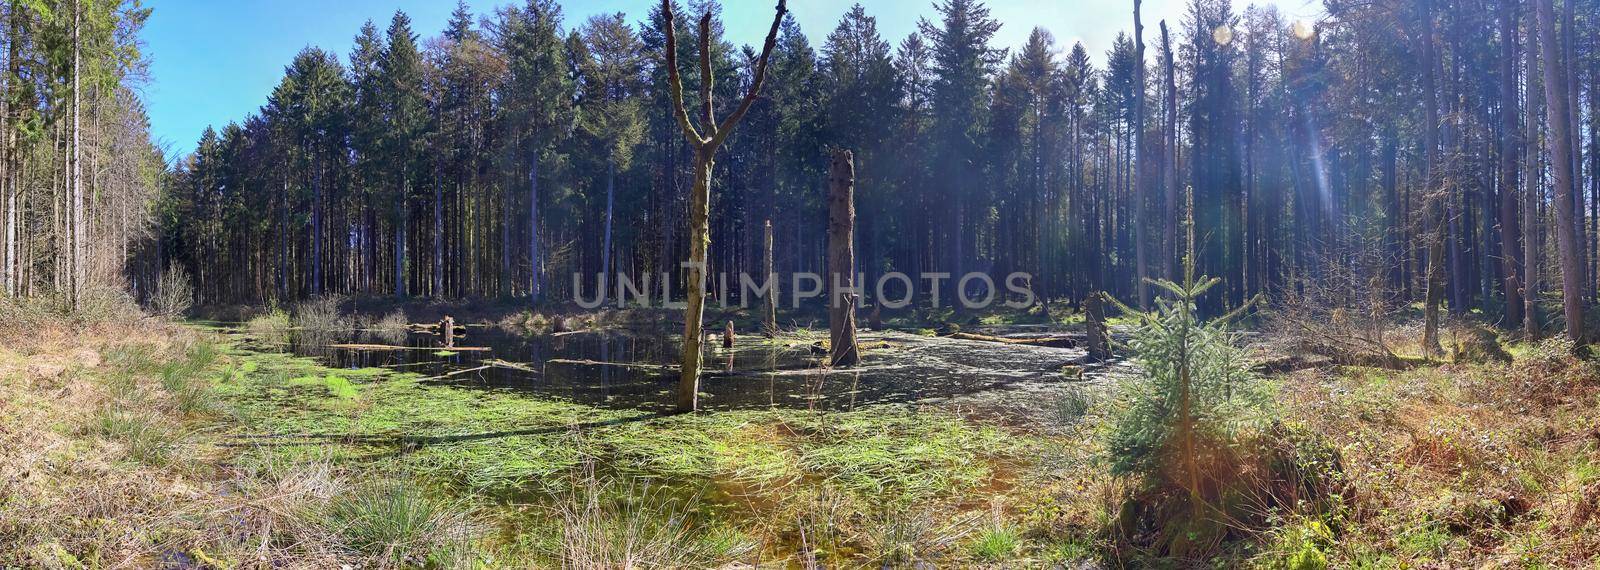 A clearing in a coniferous forest with a body of water in the swamp